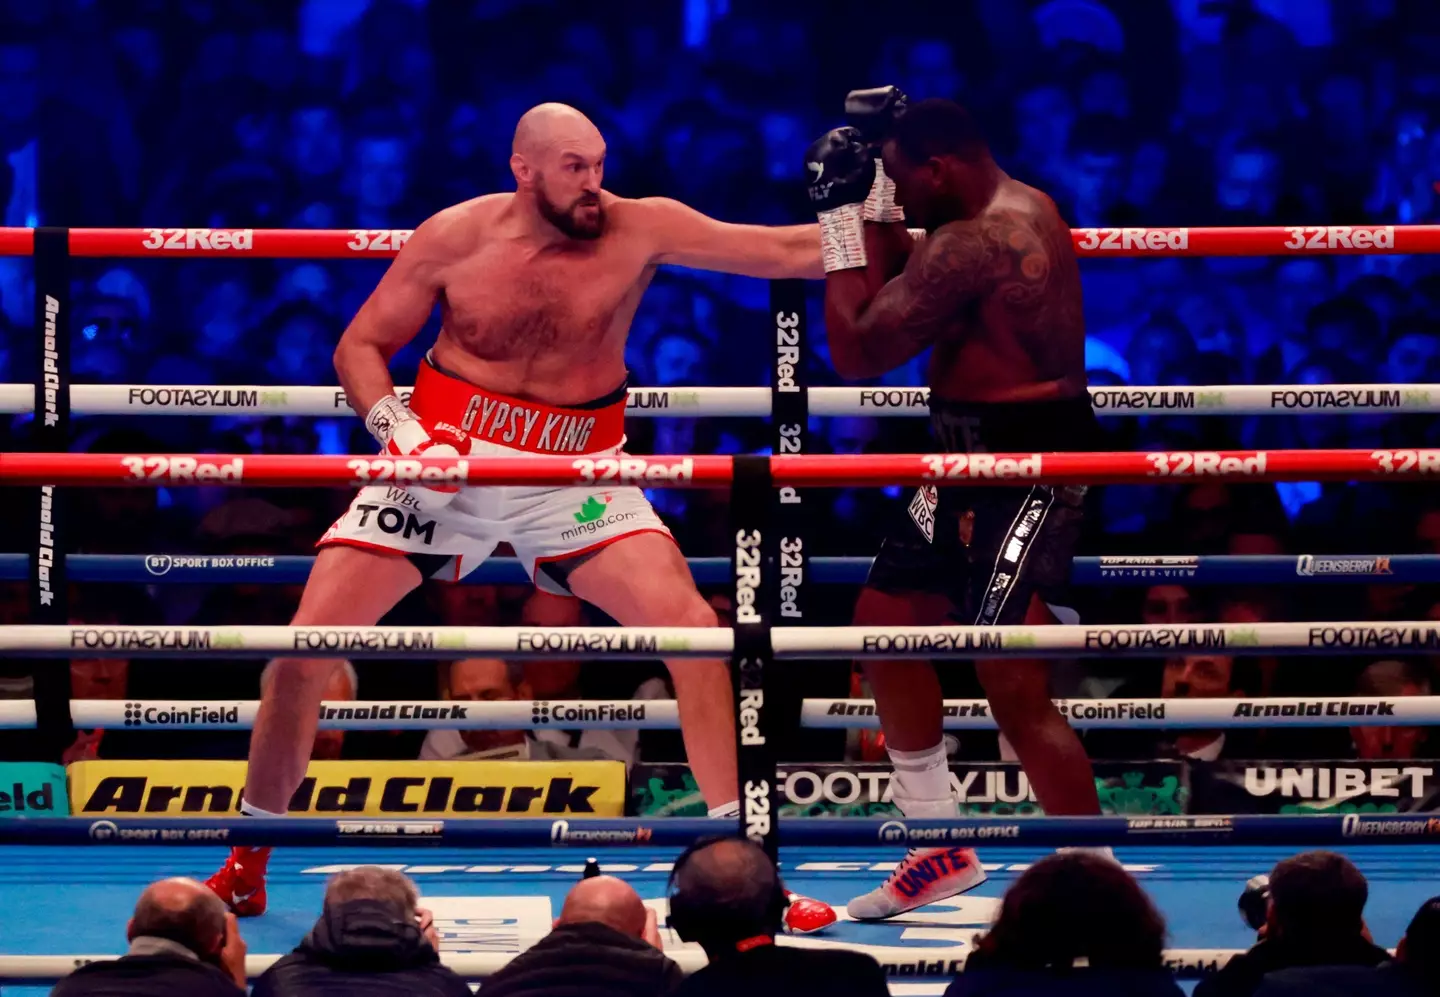 Fury announced his retirement after beating Dillian Whyte in April (Image: Alamy)